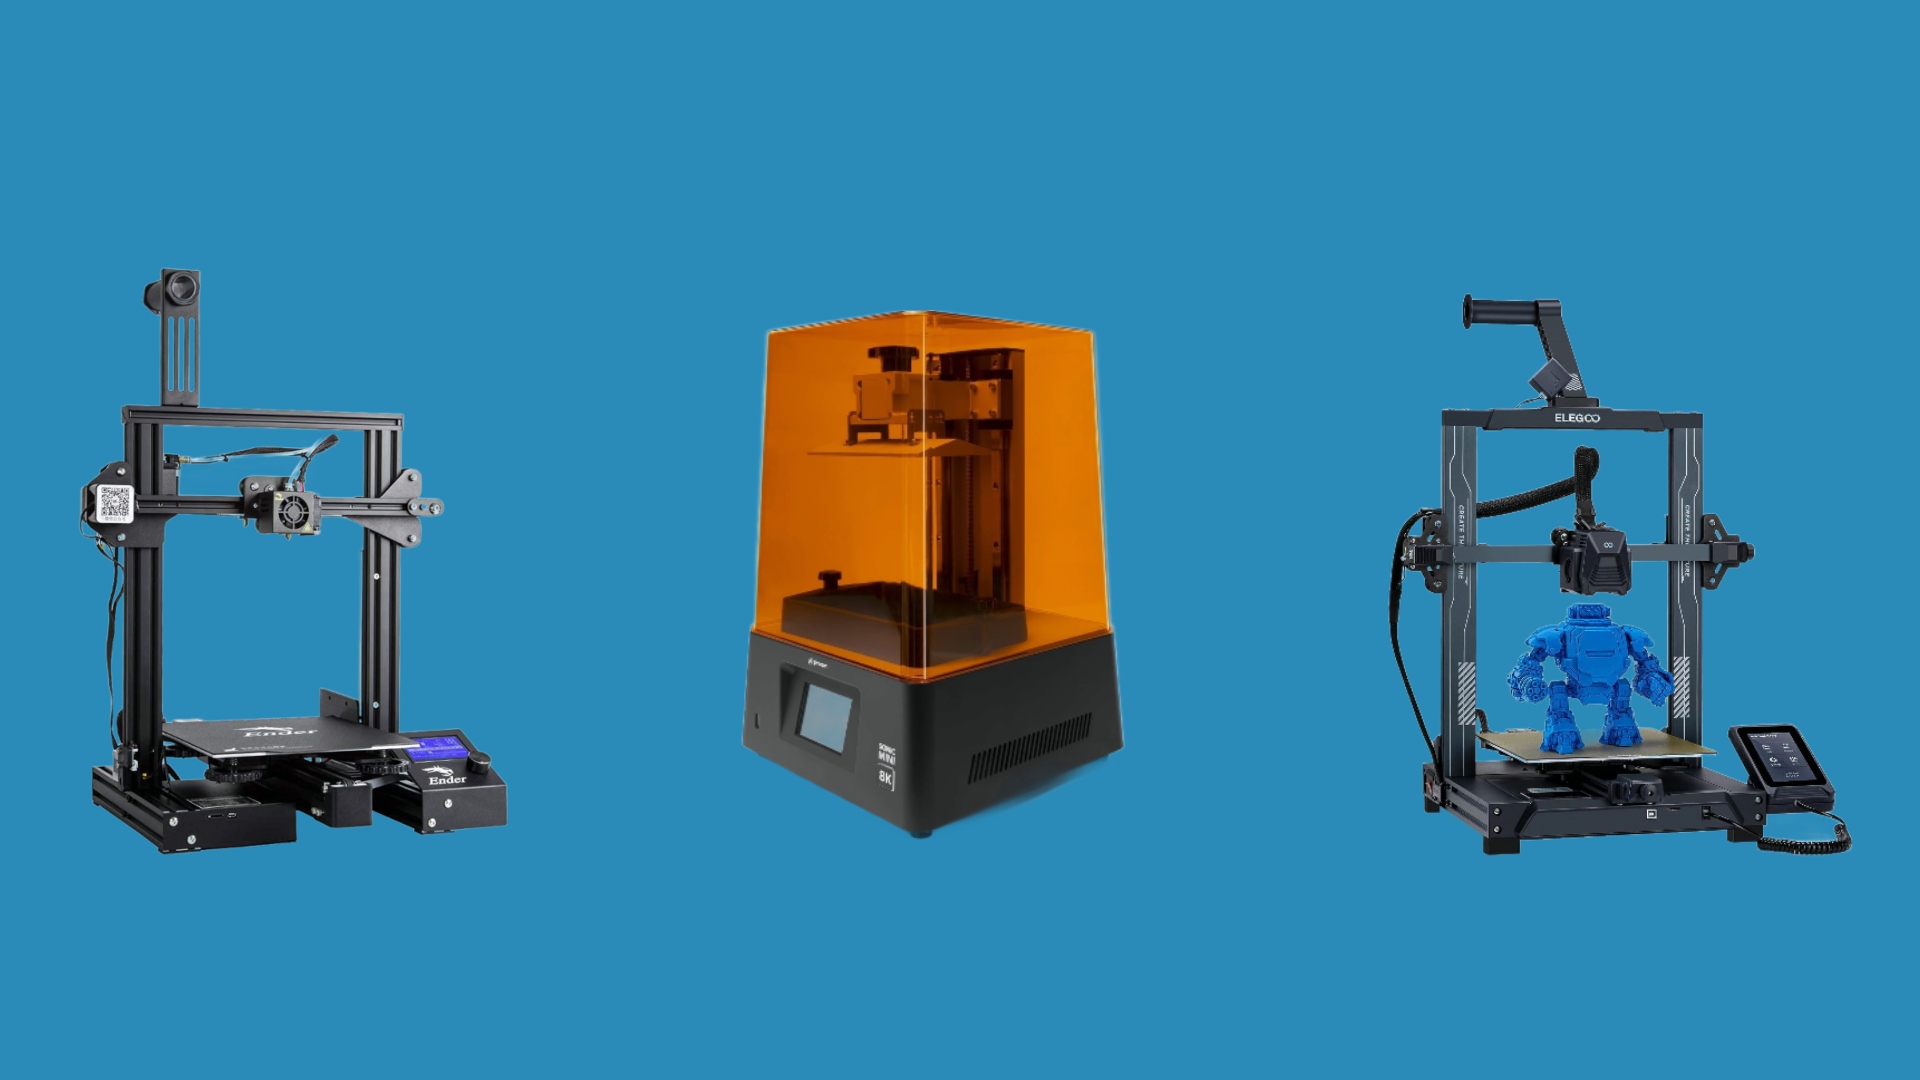 3D Printing: The Ultimate Beginners Guide - The Handy Maker